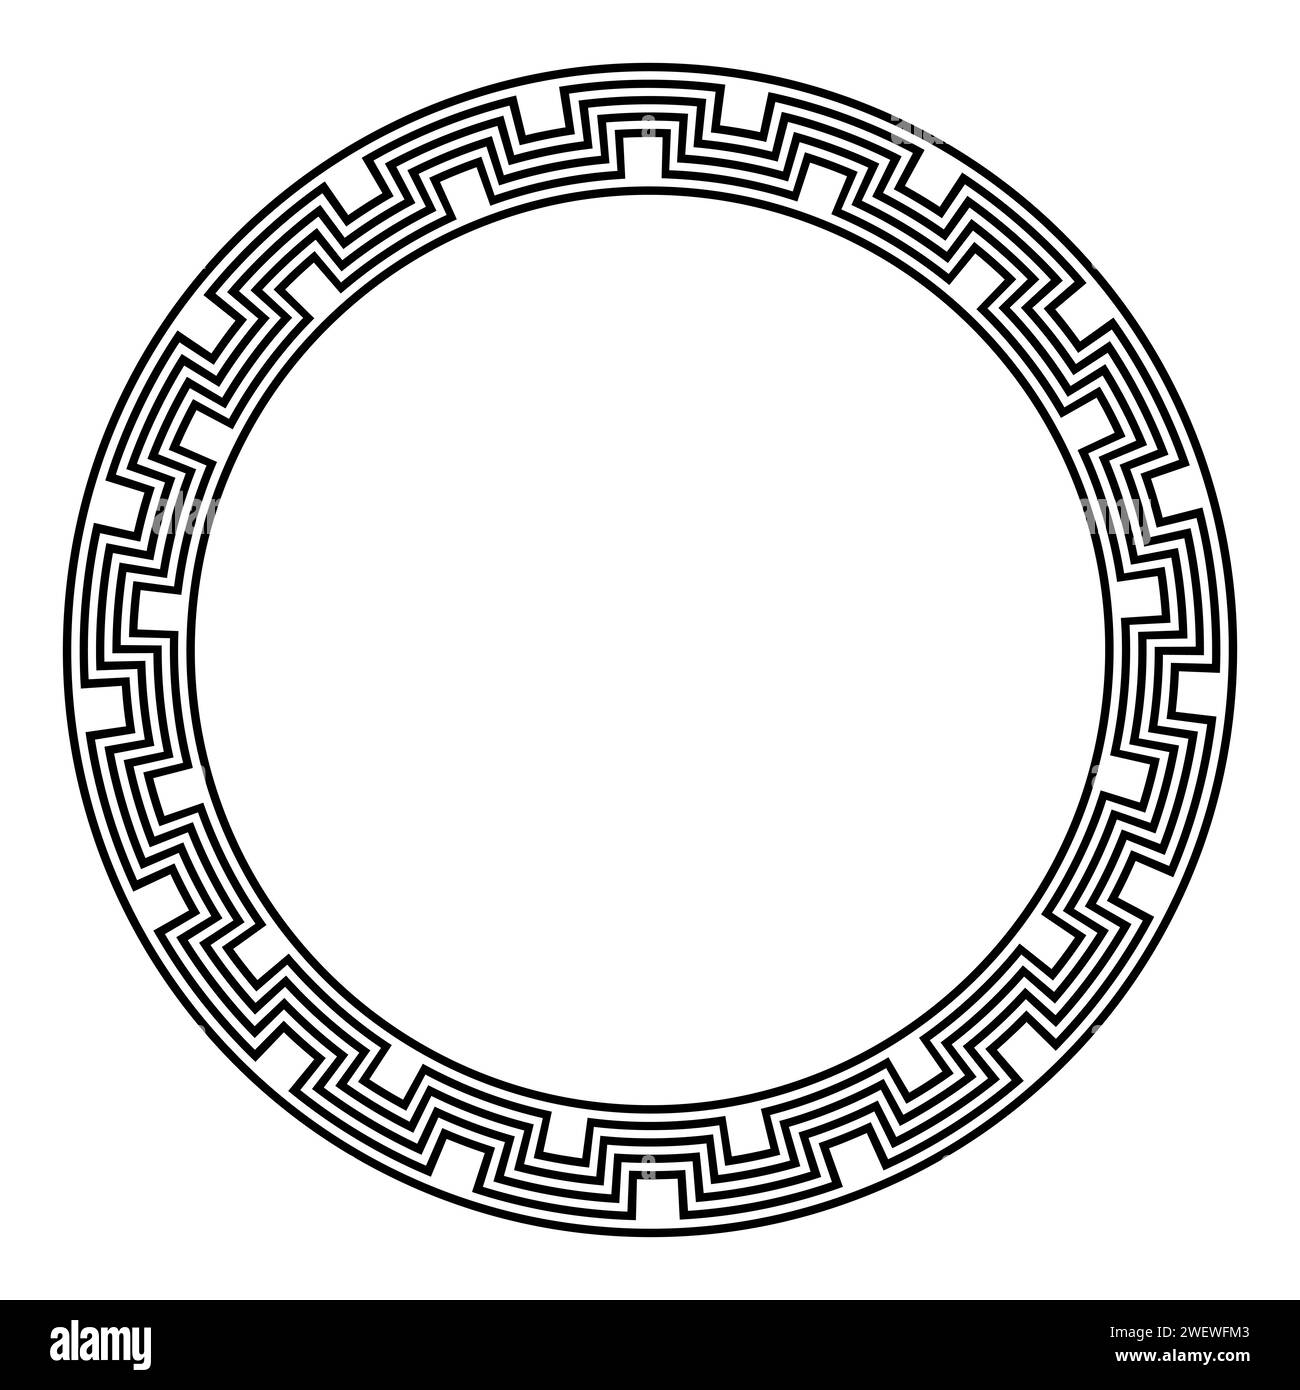 Circle frame with angular meander pattern. Decorative circular border, in ancient stepped Inca style, made of repeated steps, seamlessly connected. Stock Photo